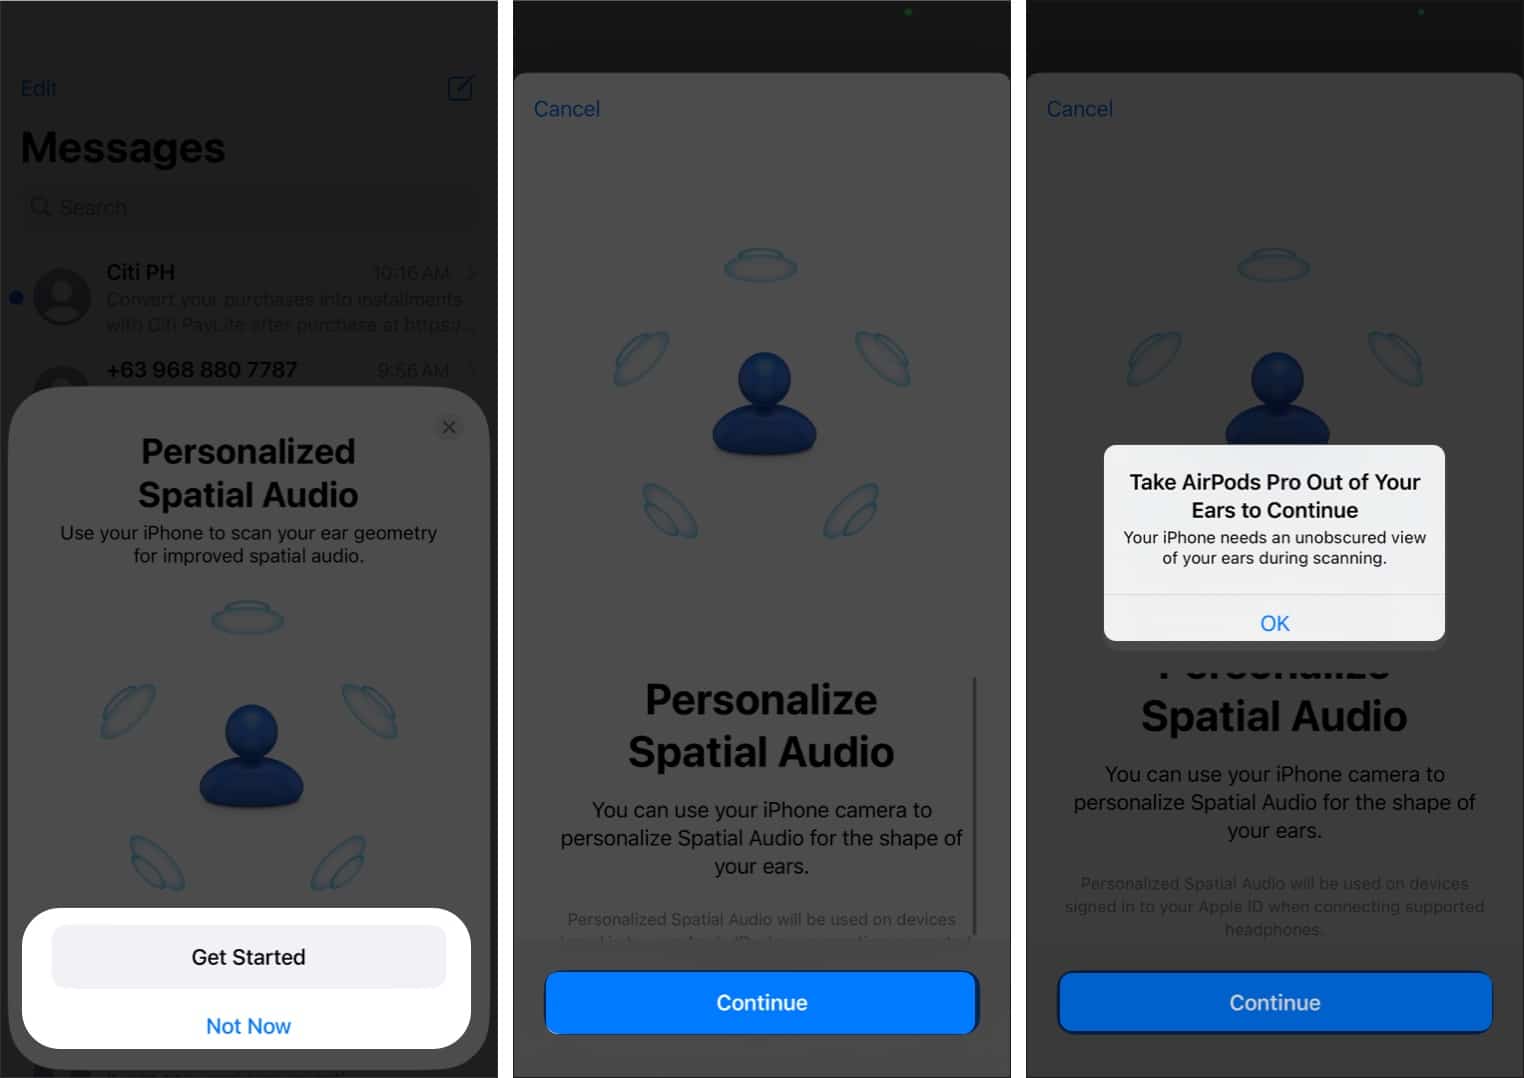 Steps to setup Personalized Spatial Audio for AirPods on iPhone